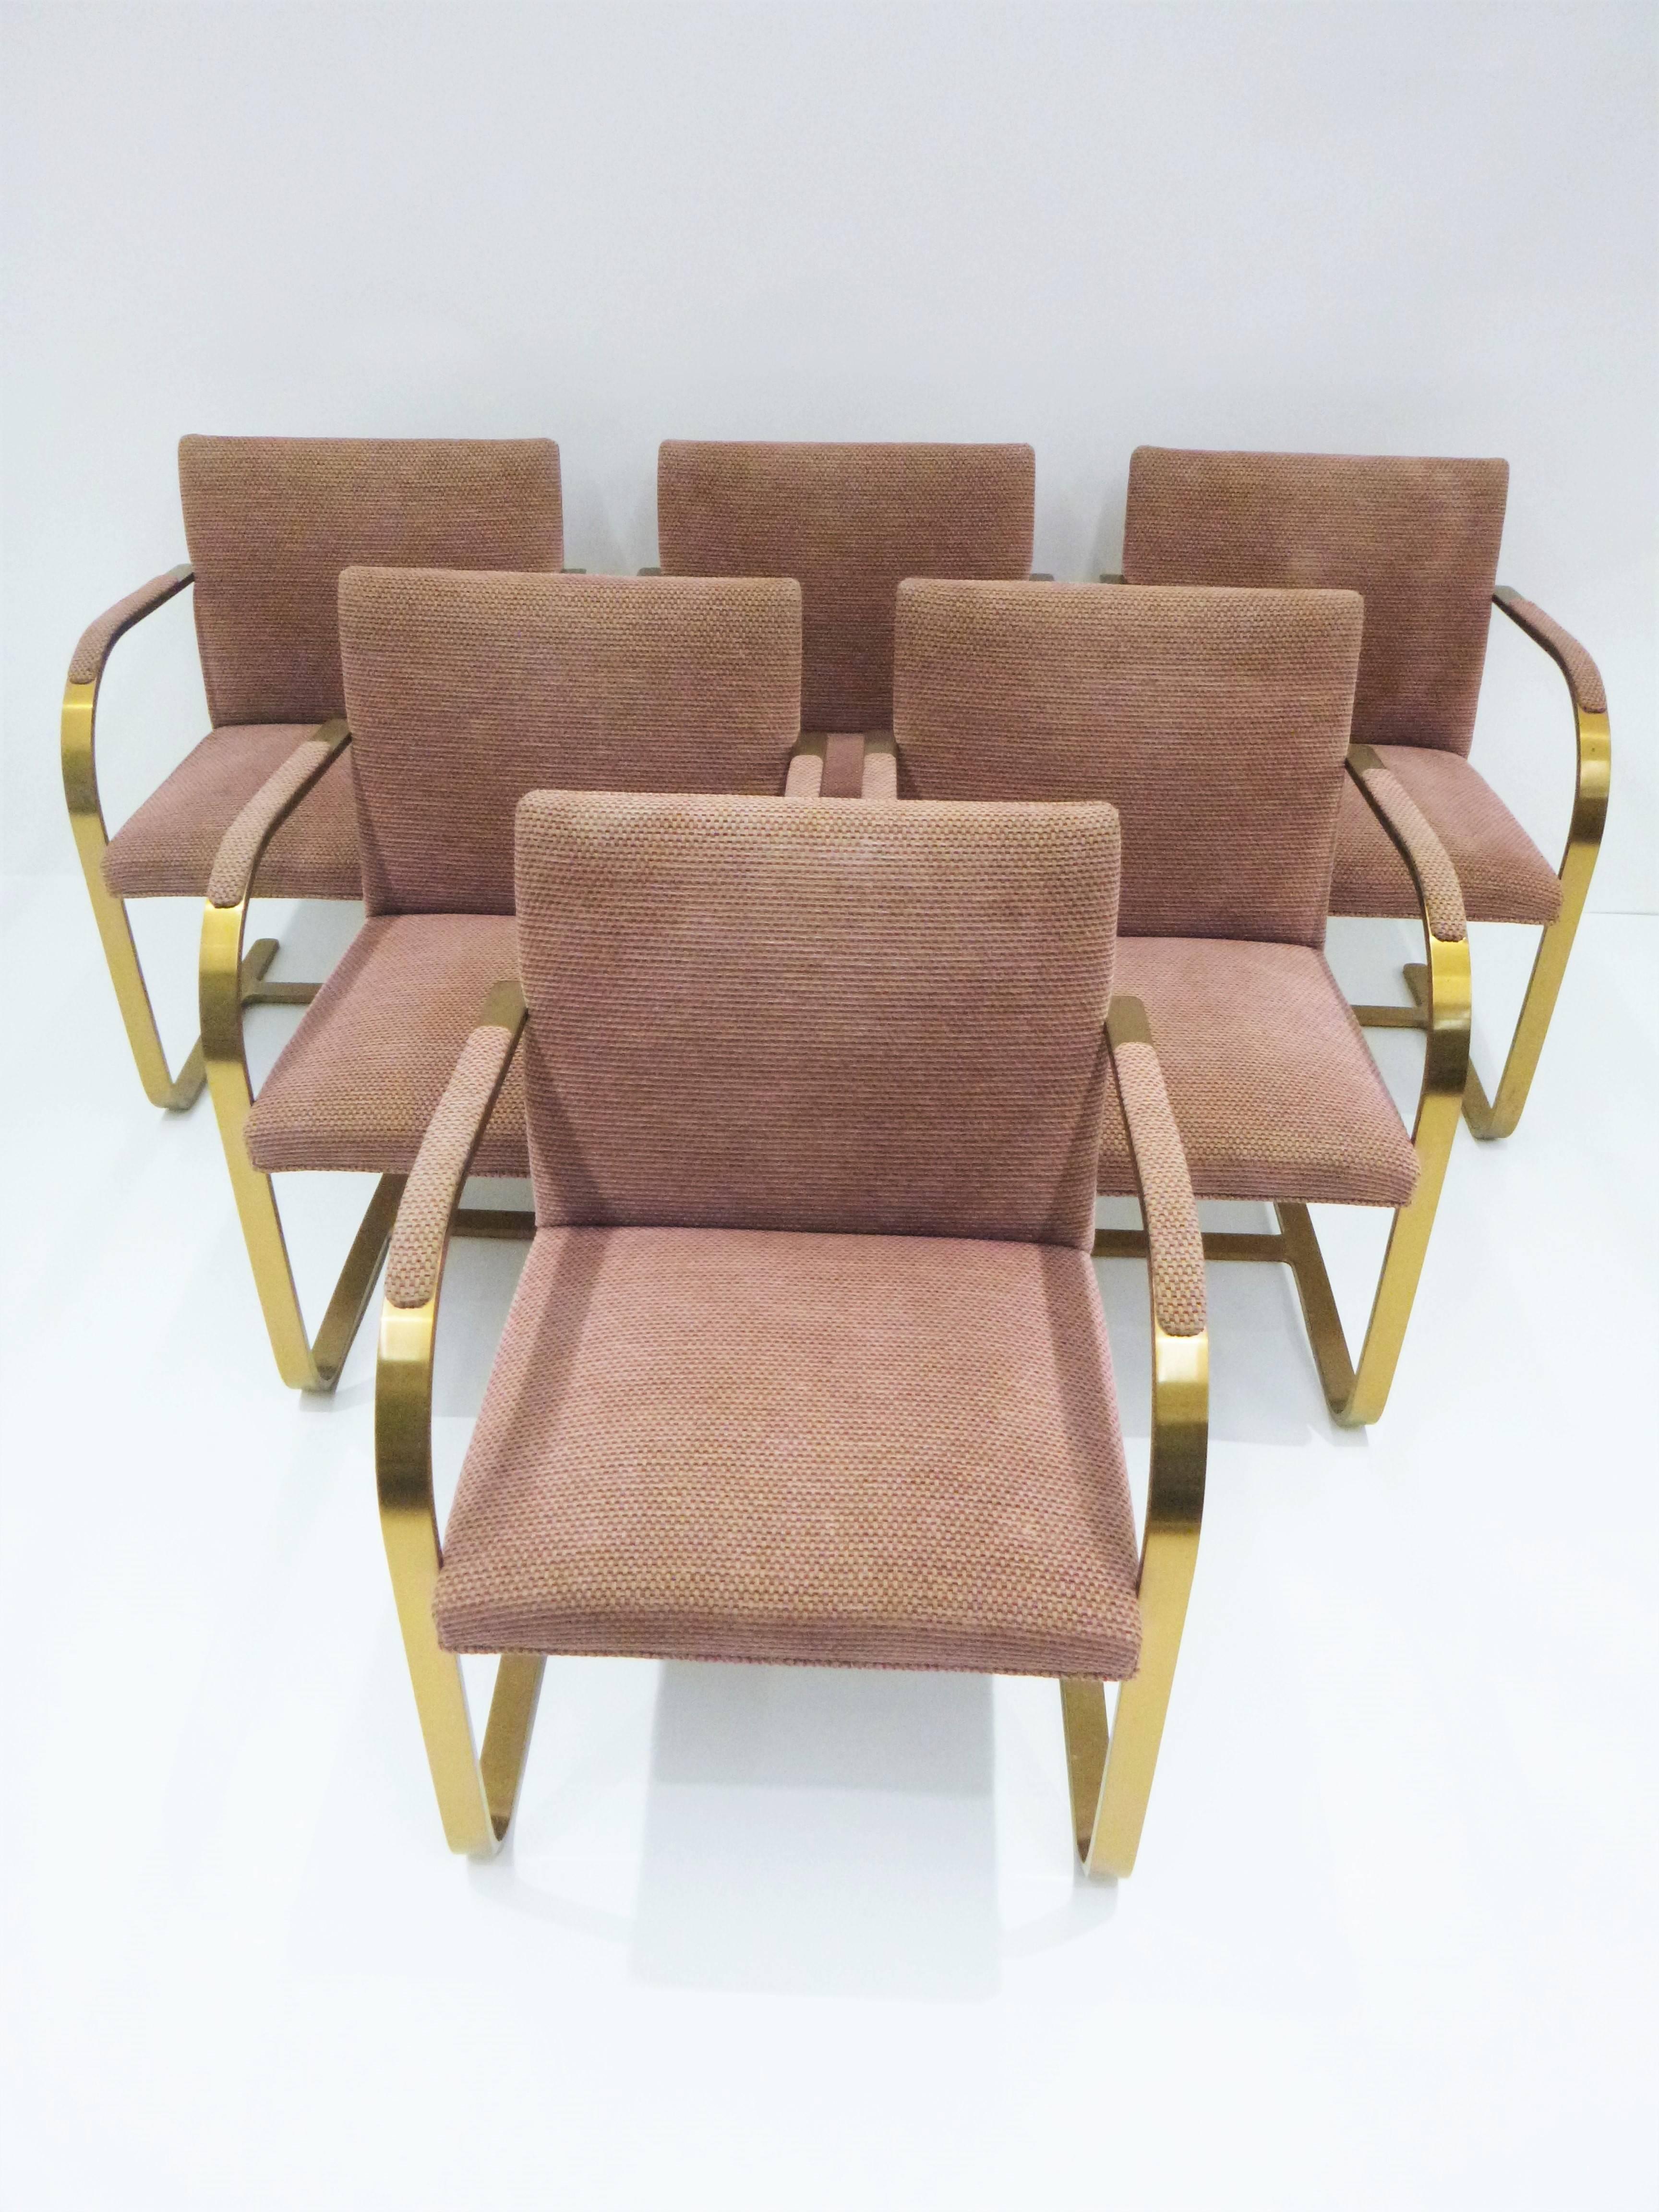 Designed in the 1930s by Mies van der Rohe, the set of chairs were manufactured in the 1960s by the finest manufacturer Brueton. Solid brass, heavy flat bar construction. Upholstered over padded seats and backs with a padded armrest for comfort,